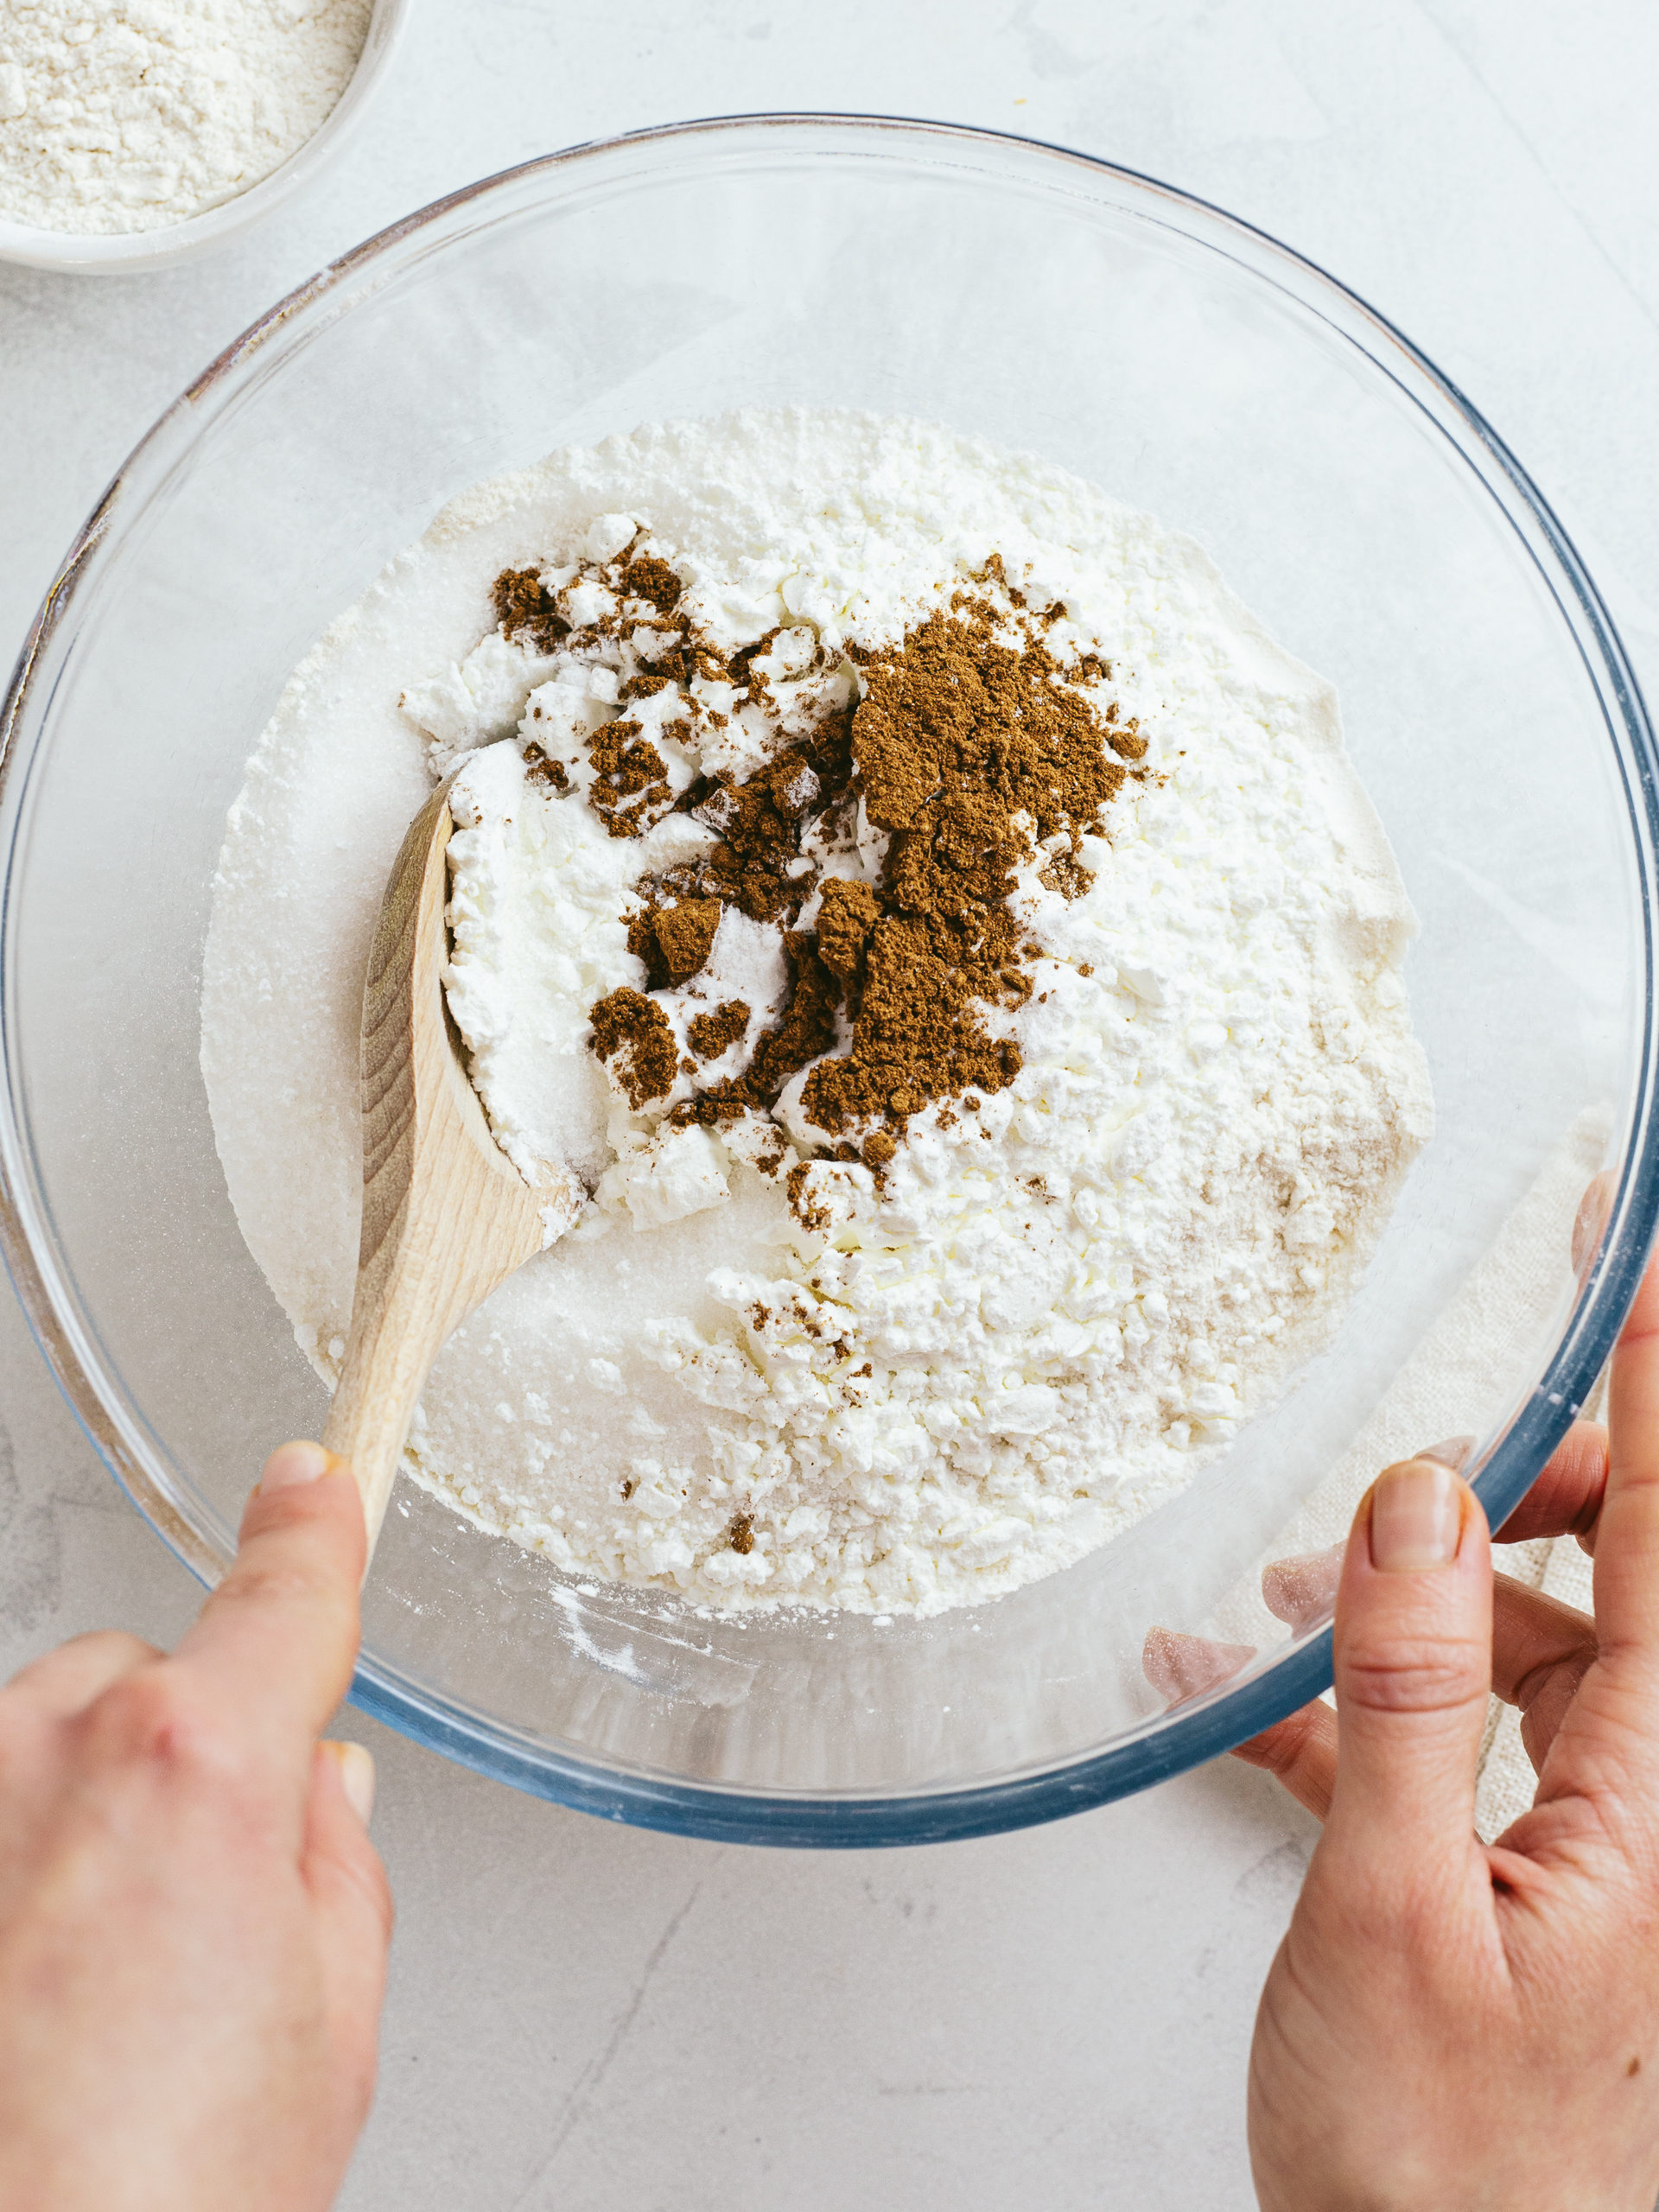 dry ingredients mixed in a bowl for cake batter